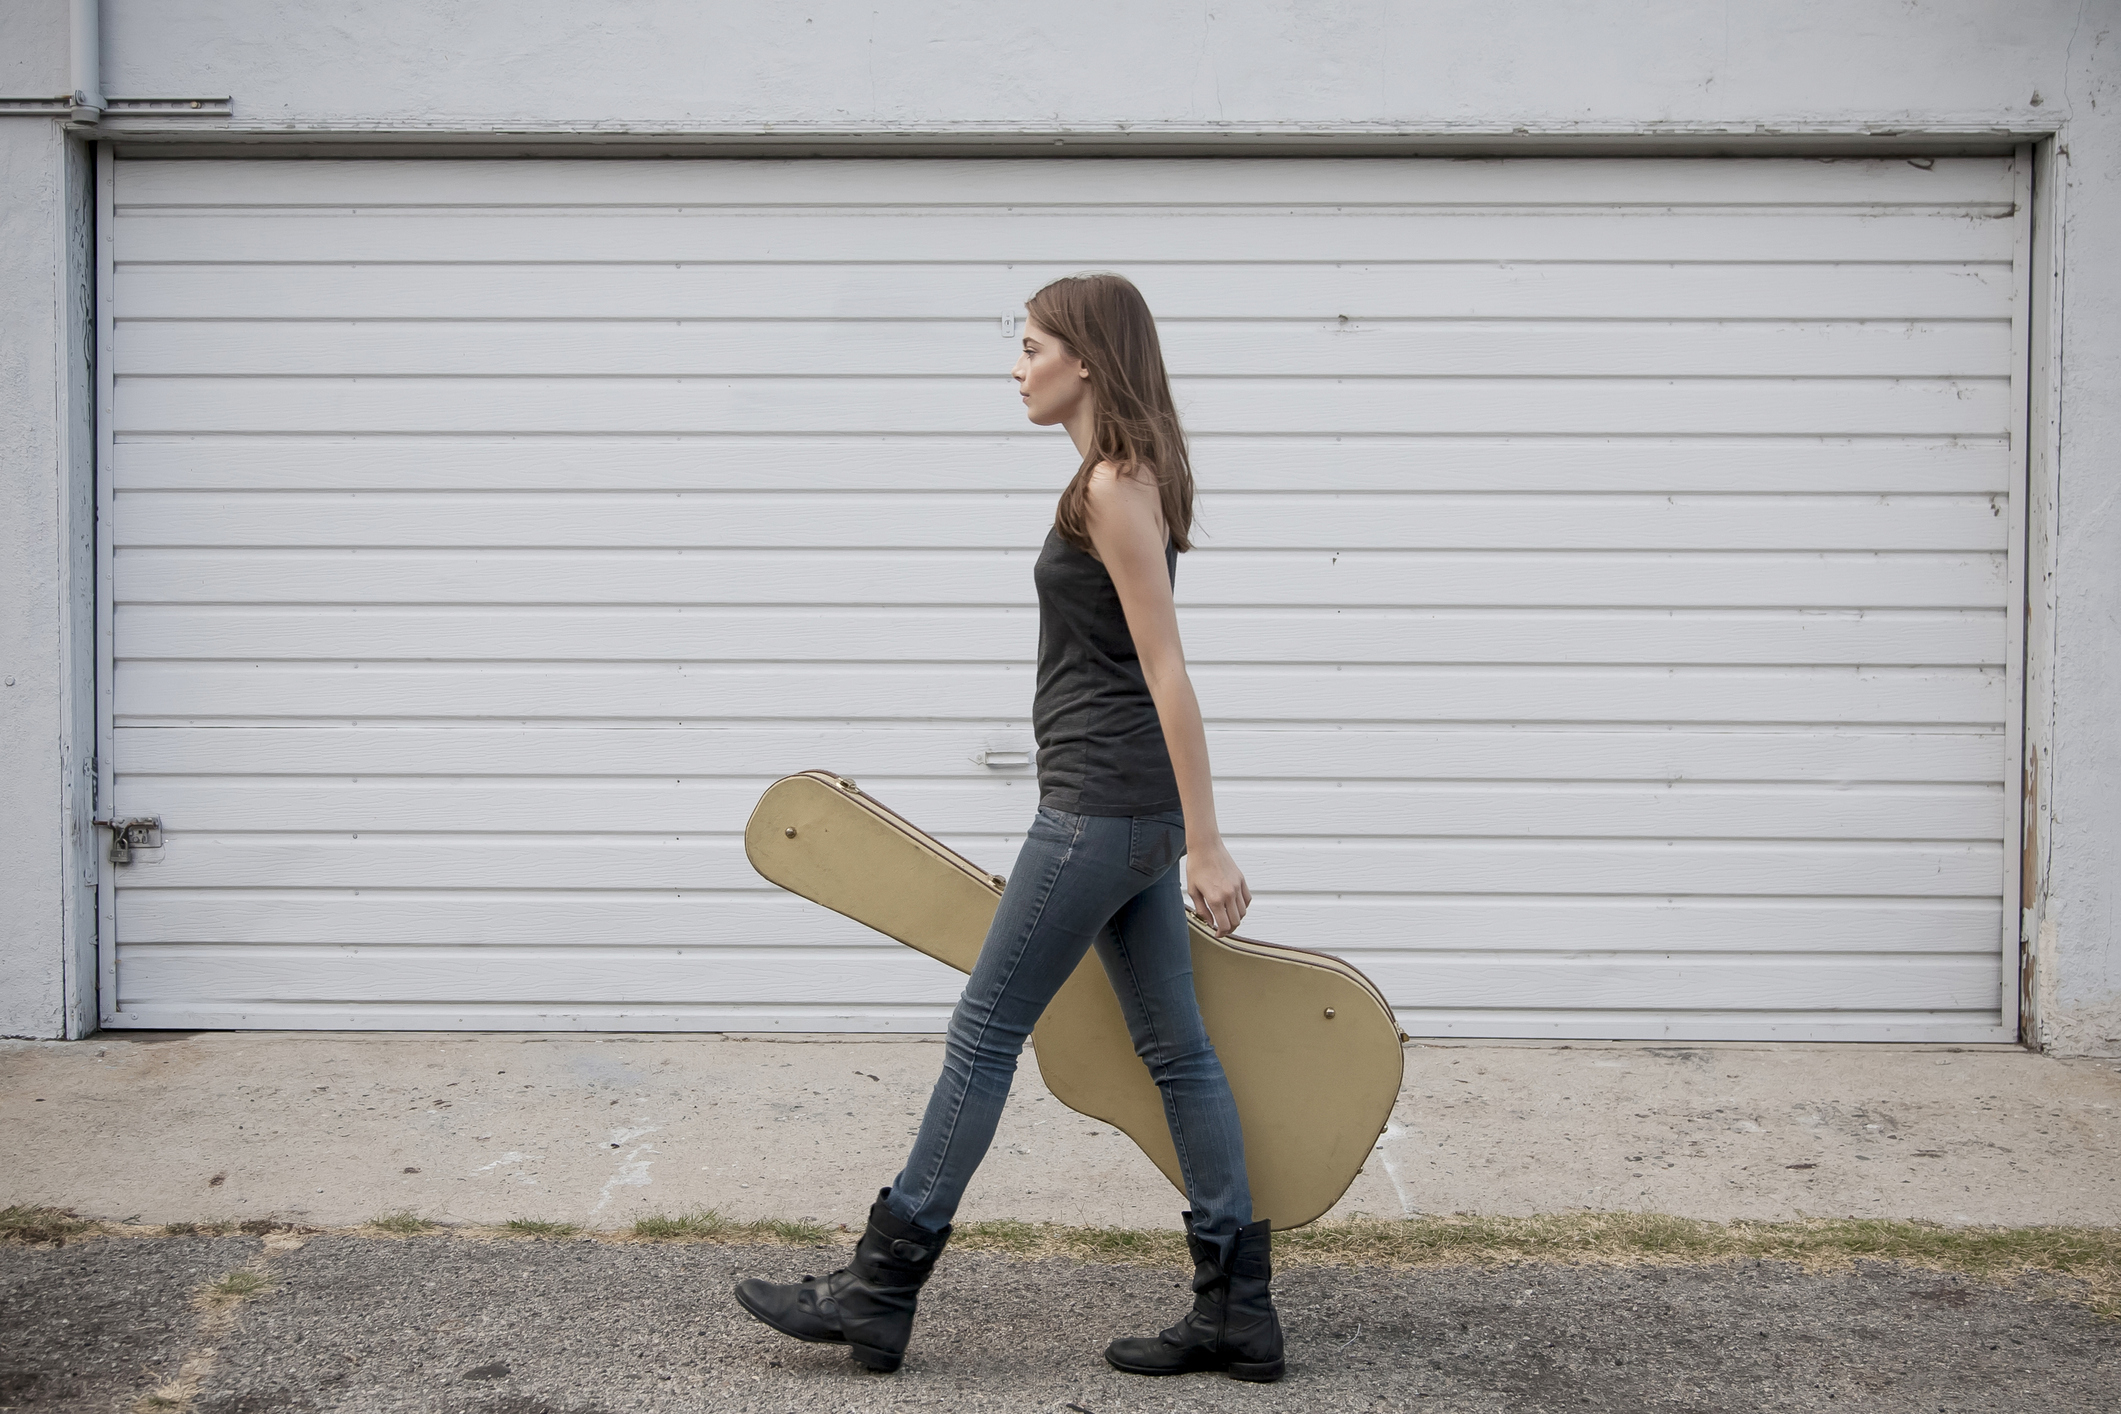 Woman carrying guitar on the street